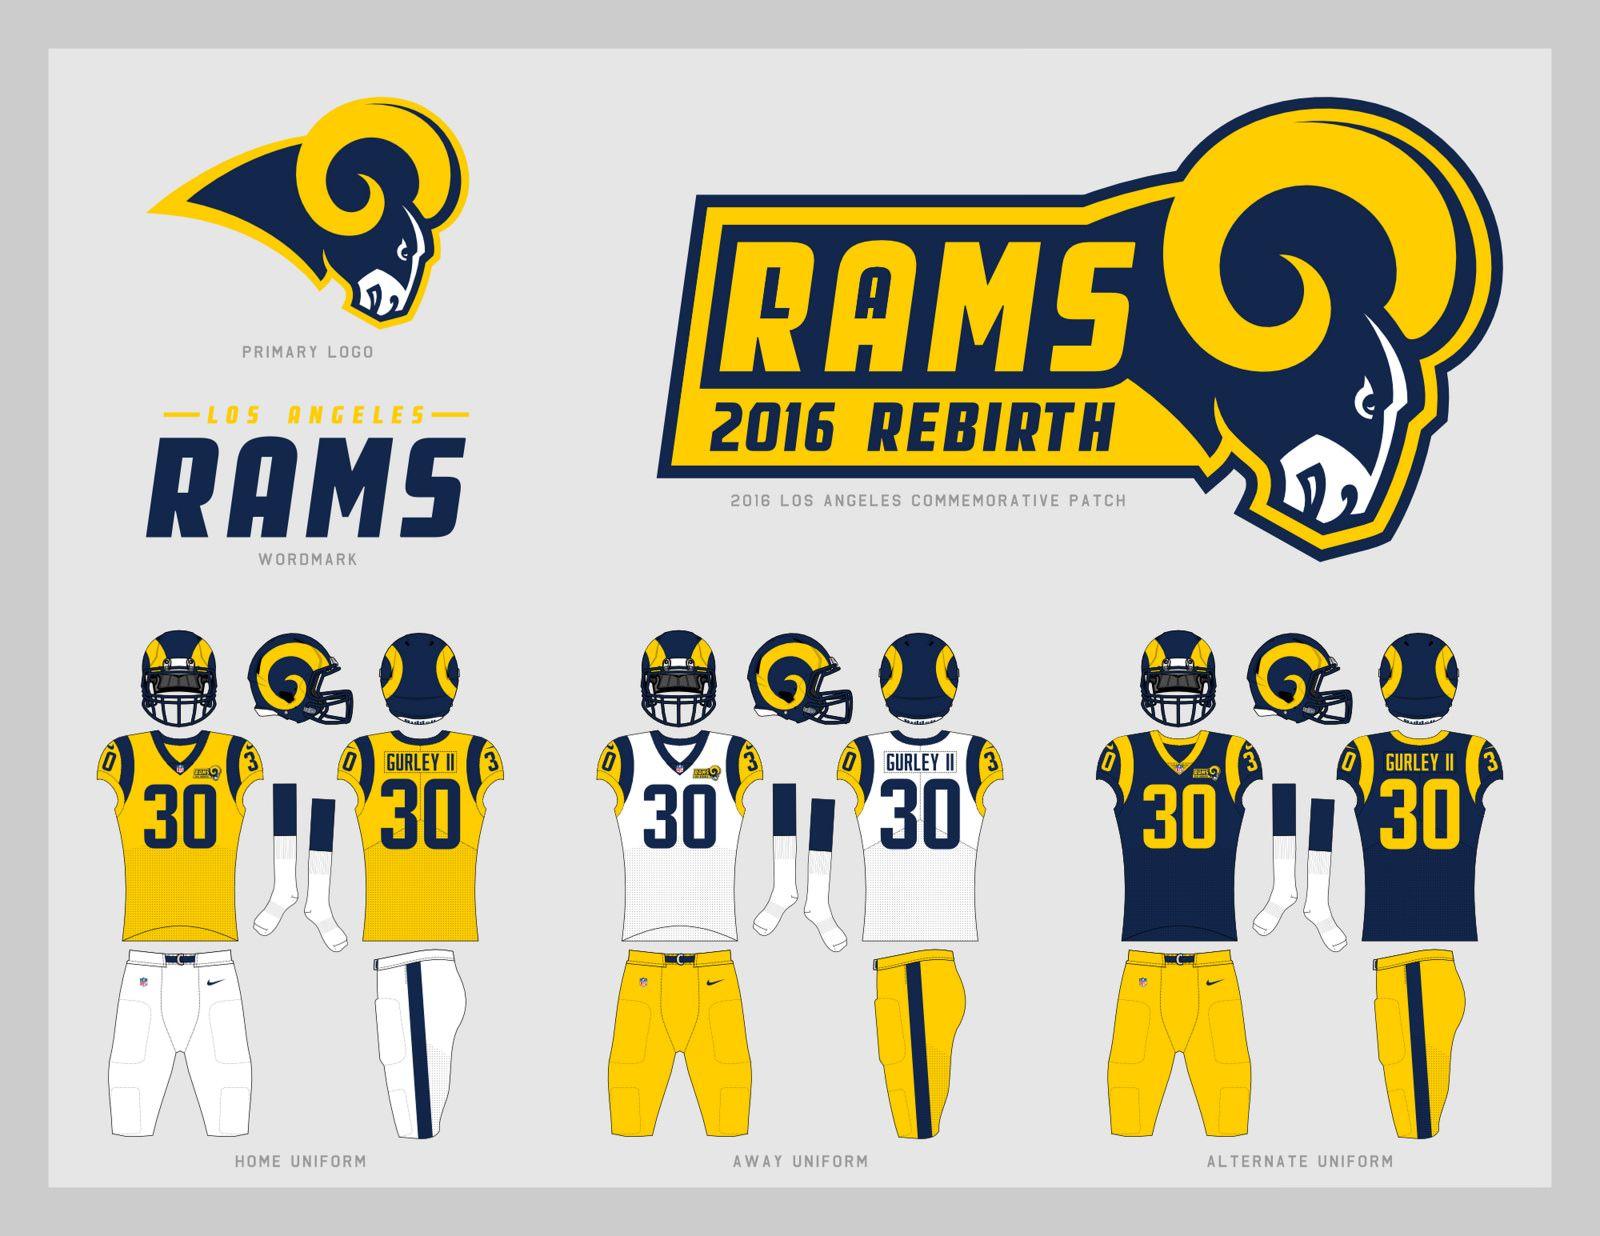 Uni Watch contest results - How you'd redesign the Rams